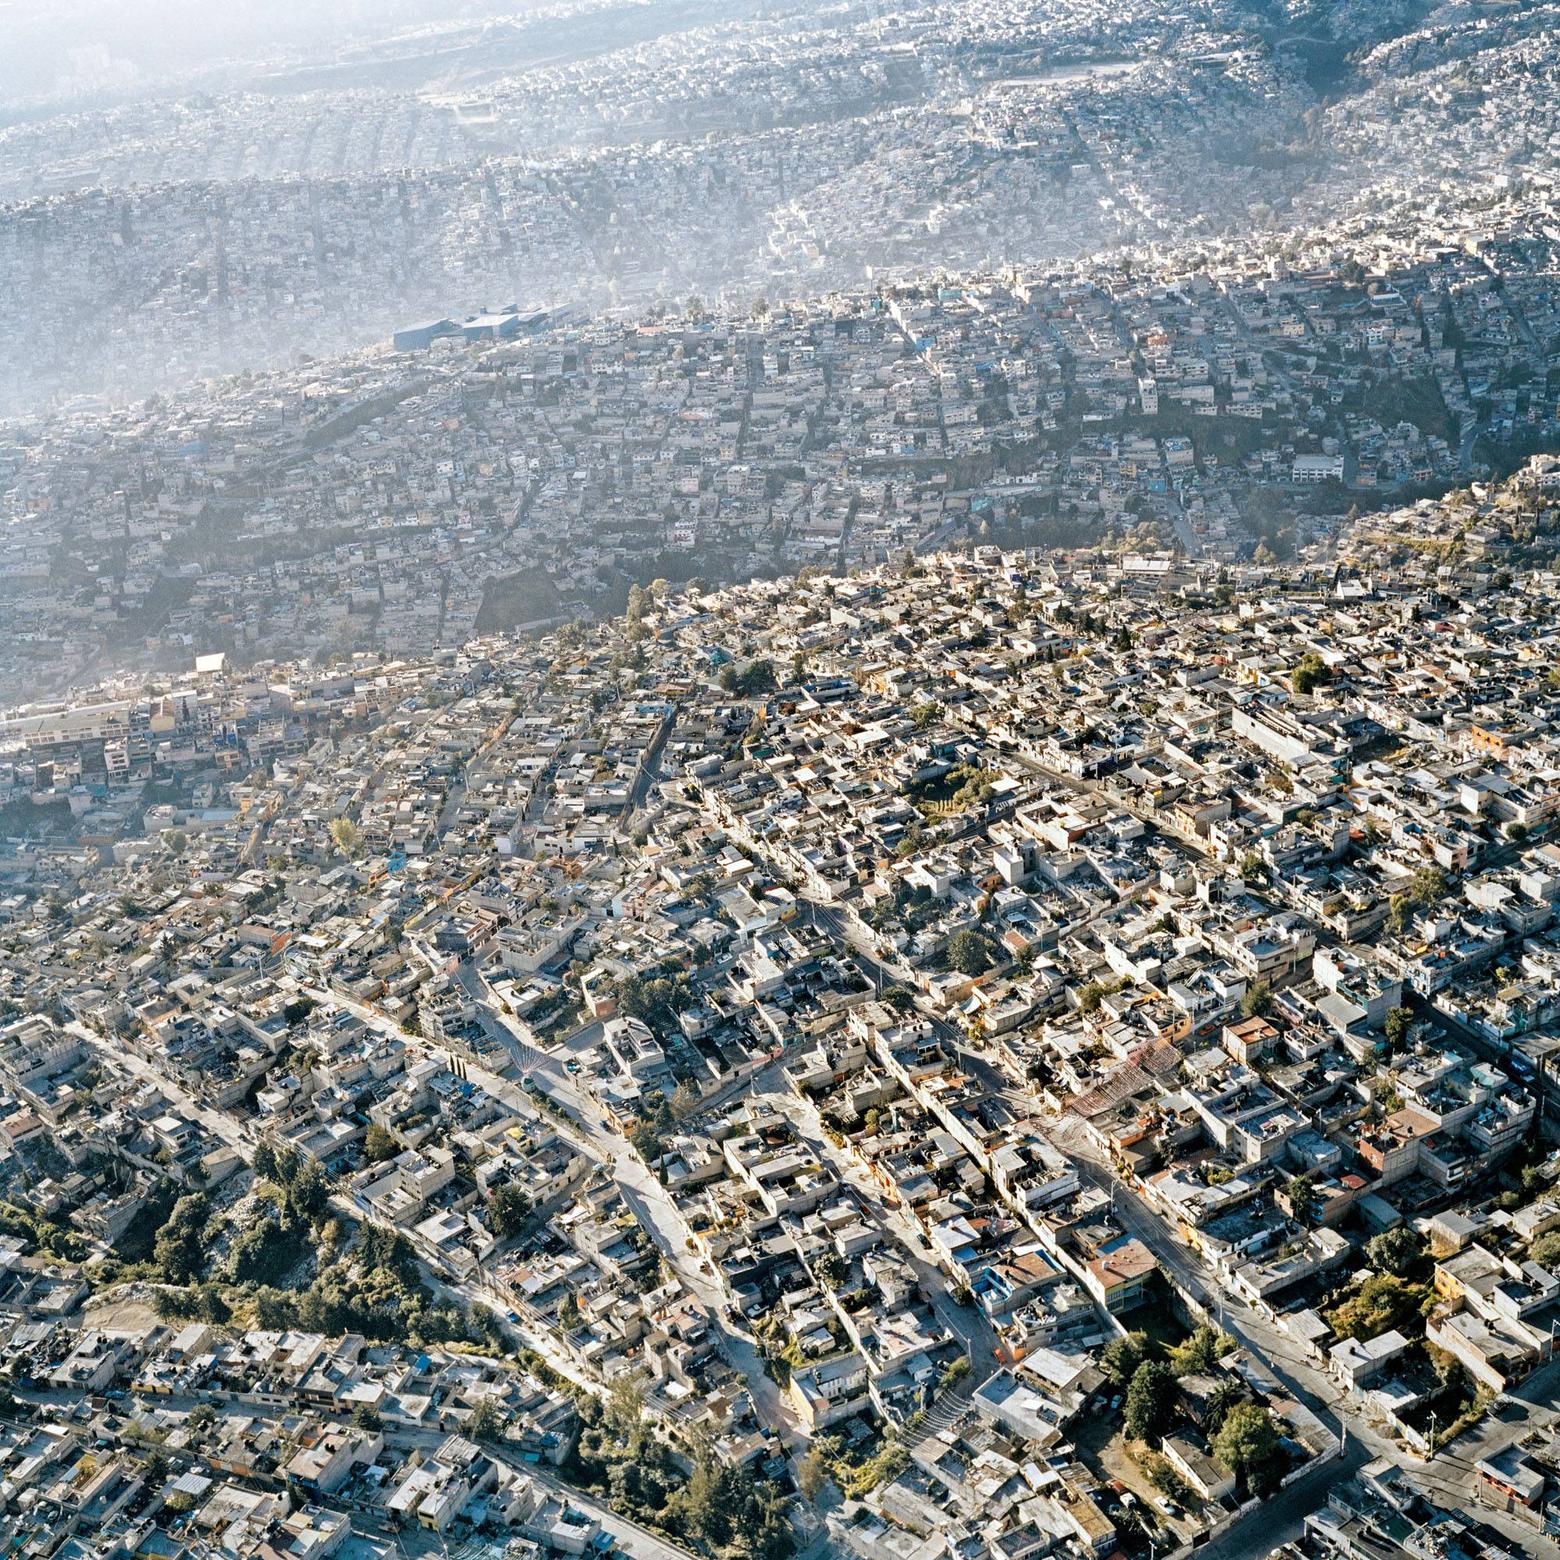 Mexico City as urban concrete jungle on rolling hills